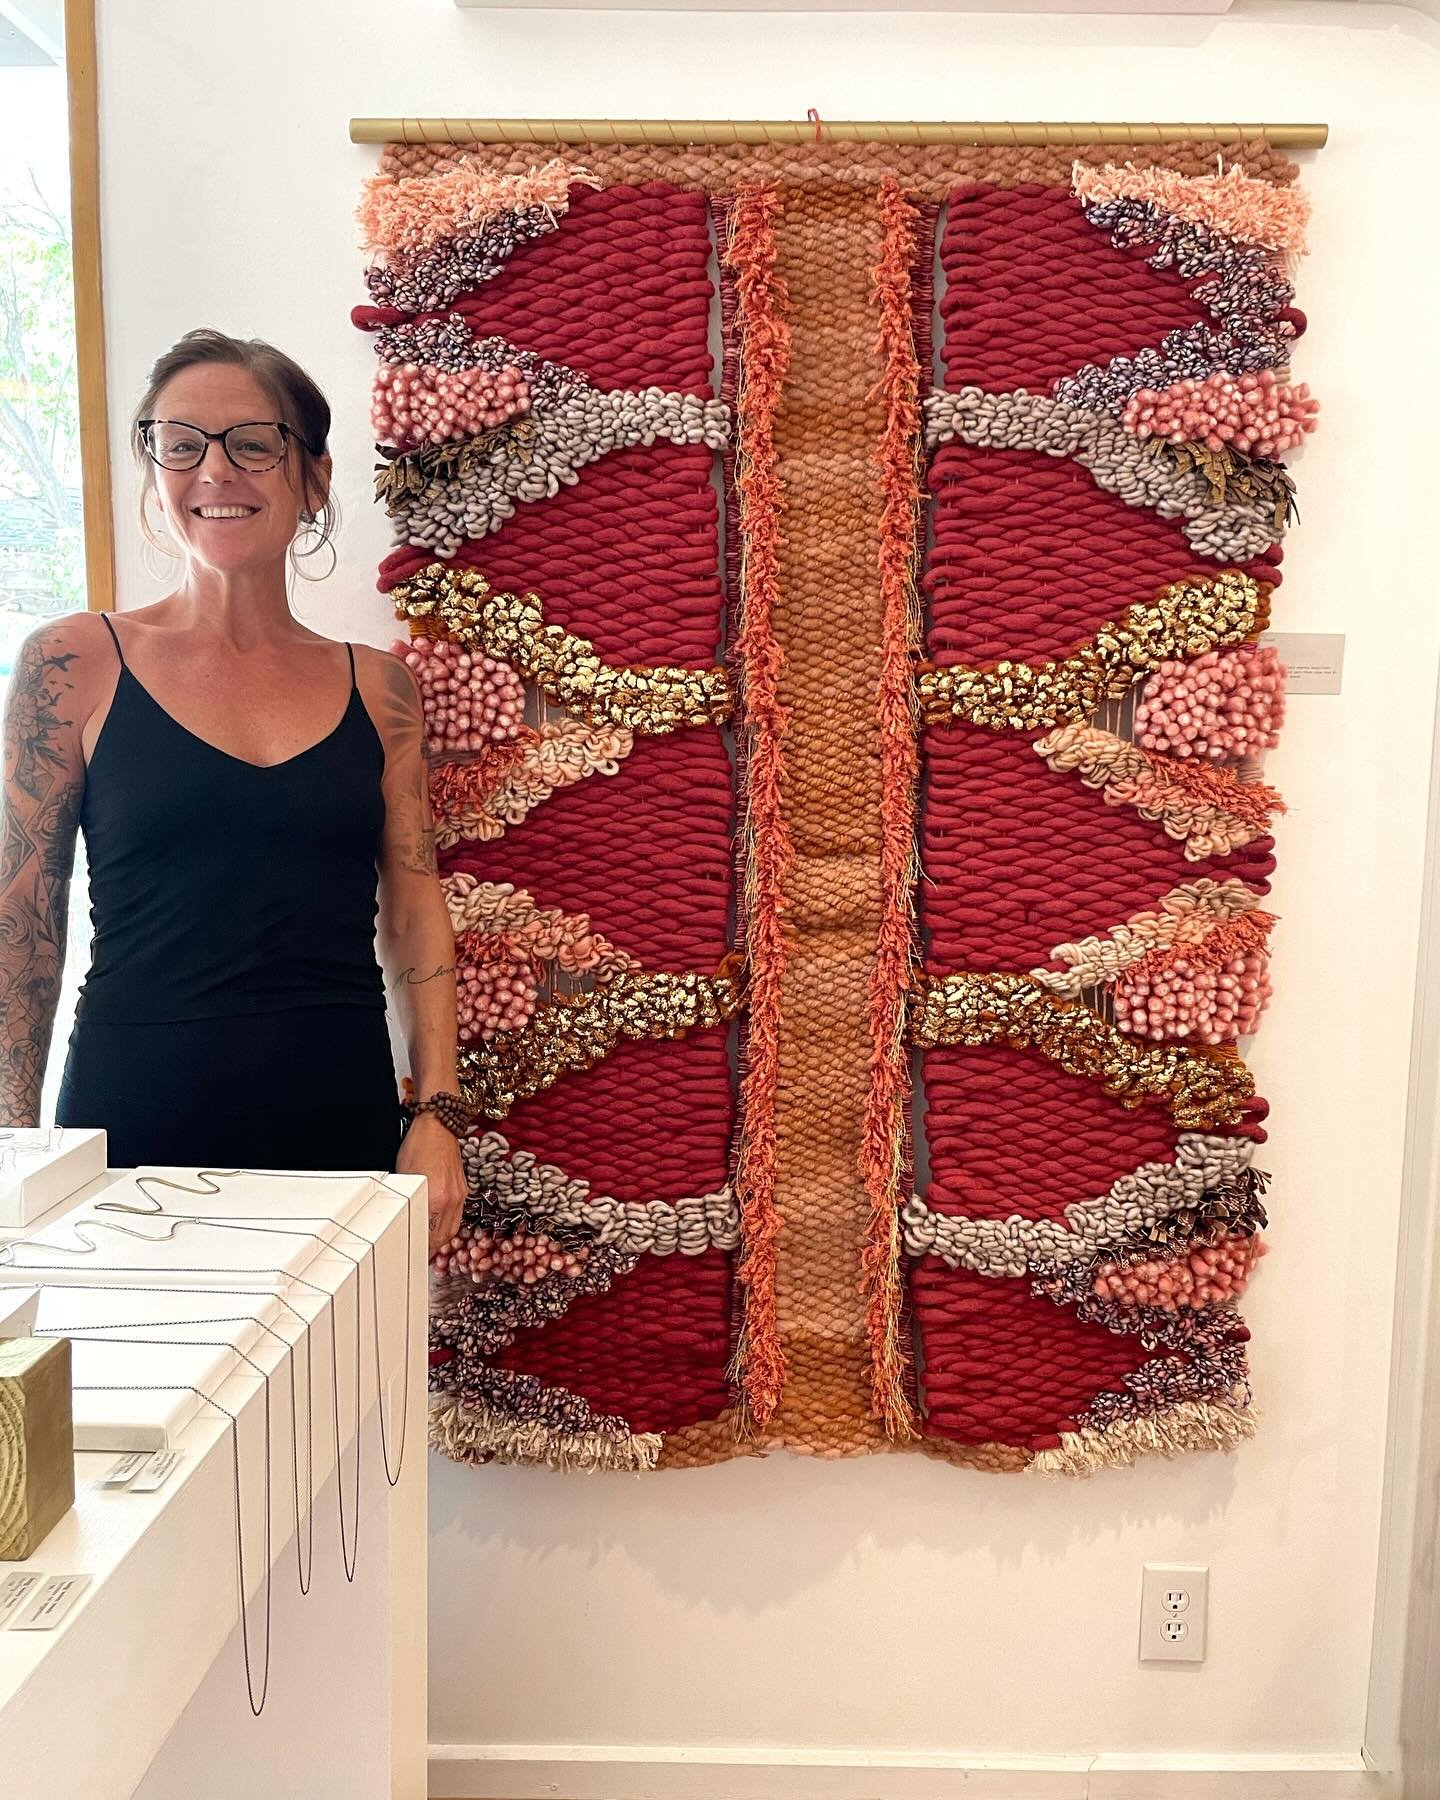 I dropped off &ldquo;Golden Hour&rdquo; to @alchemystudiomadrid yesterday, pictured here with the amazing gallery owner @lucybarna.music. I created this weaving last summer but she didn&rsquo;t feel quite finished. I added gold leaf and gold floss to